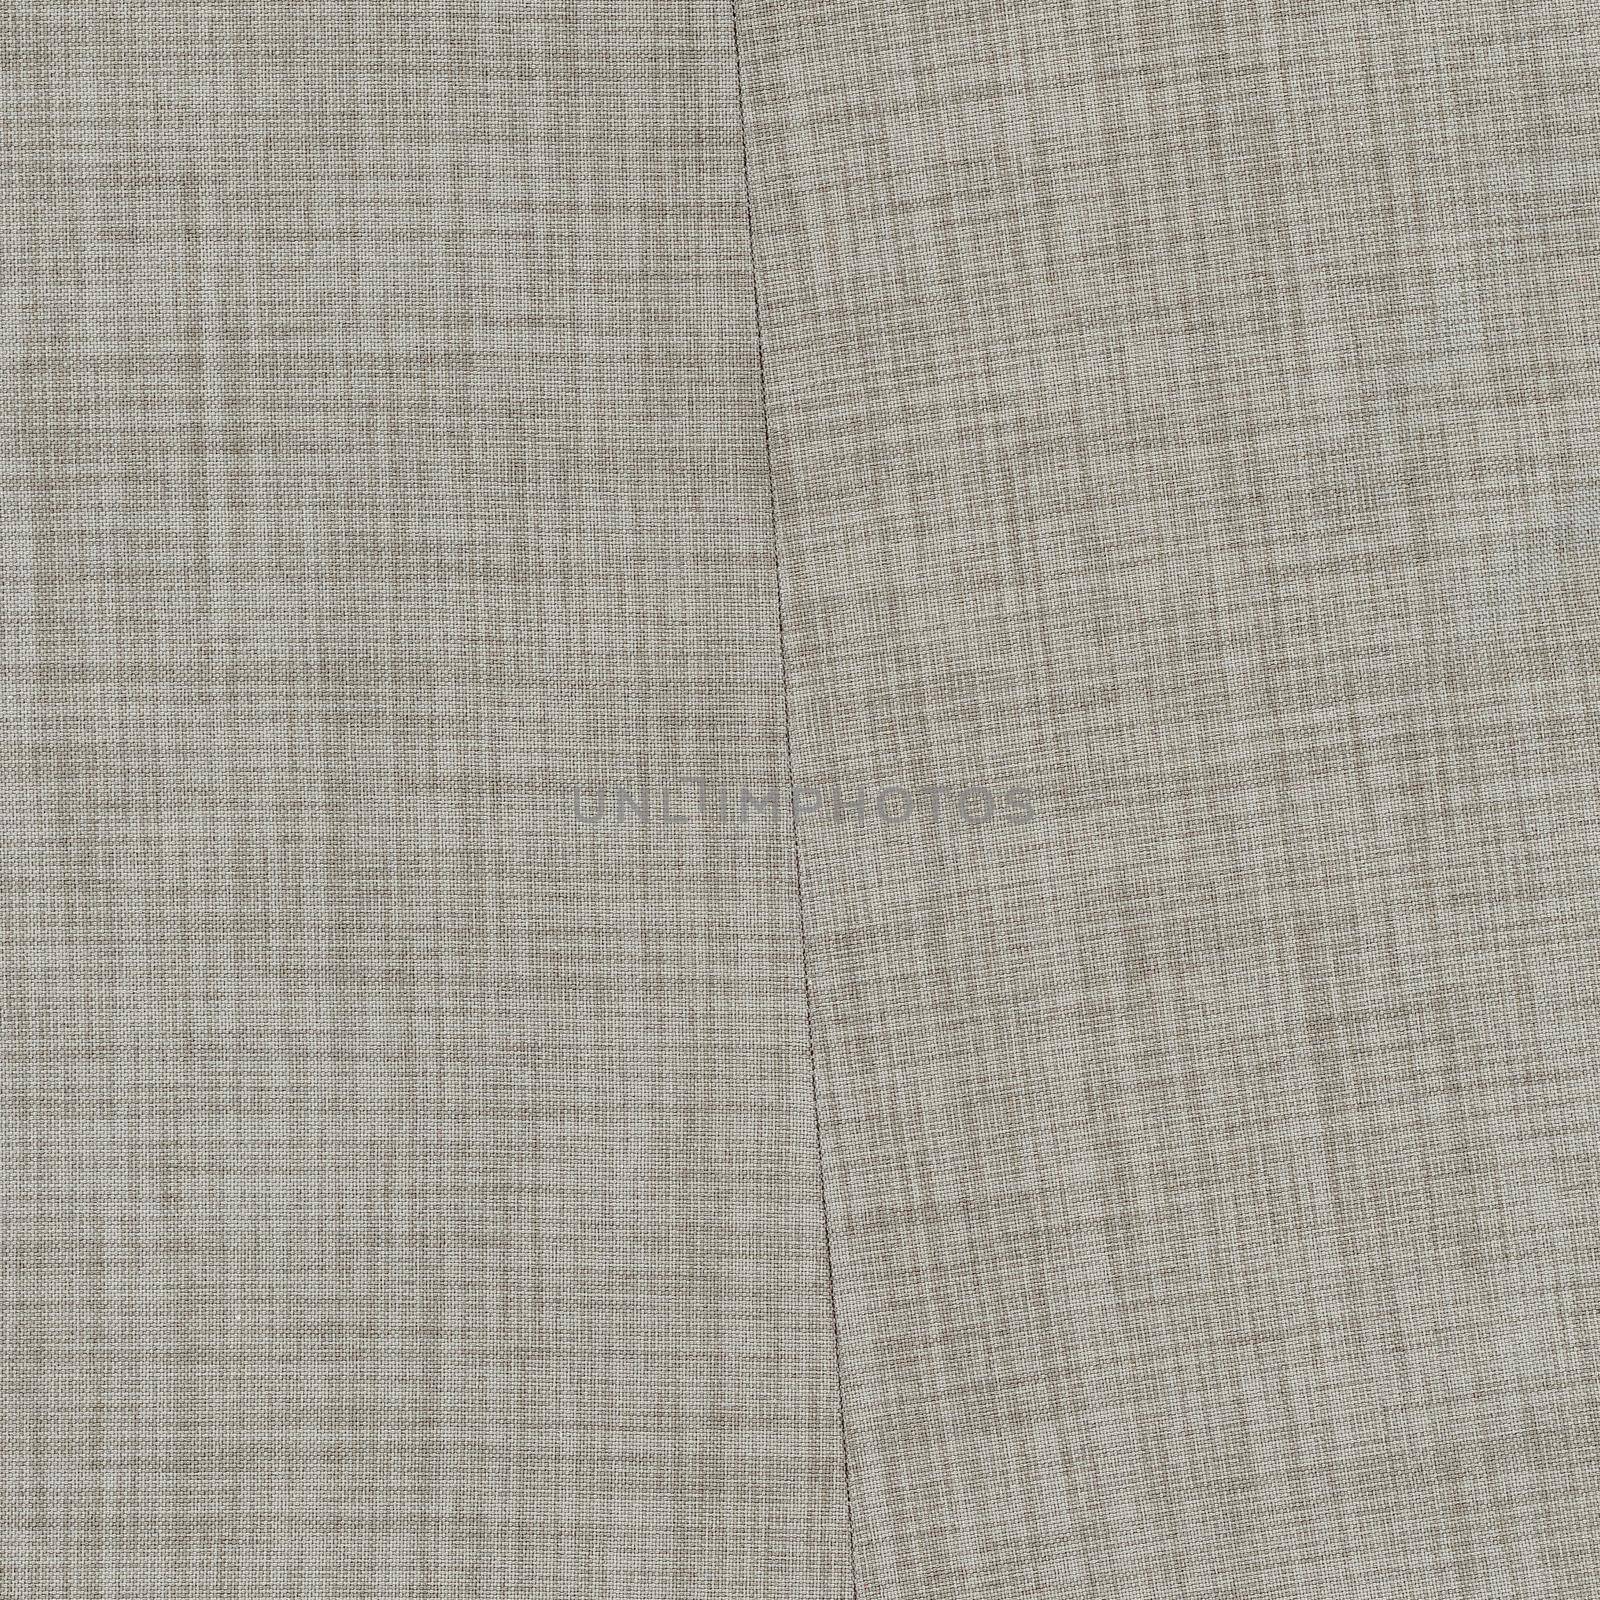 light grey polyester and cotton fabric texture background by claudiodivizia